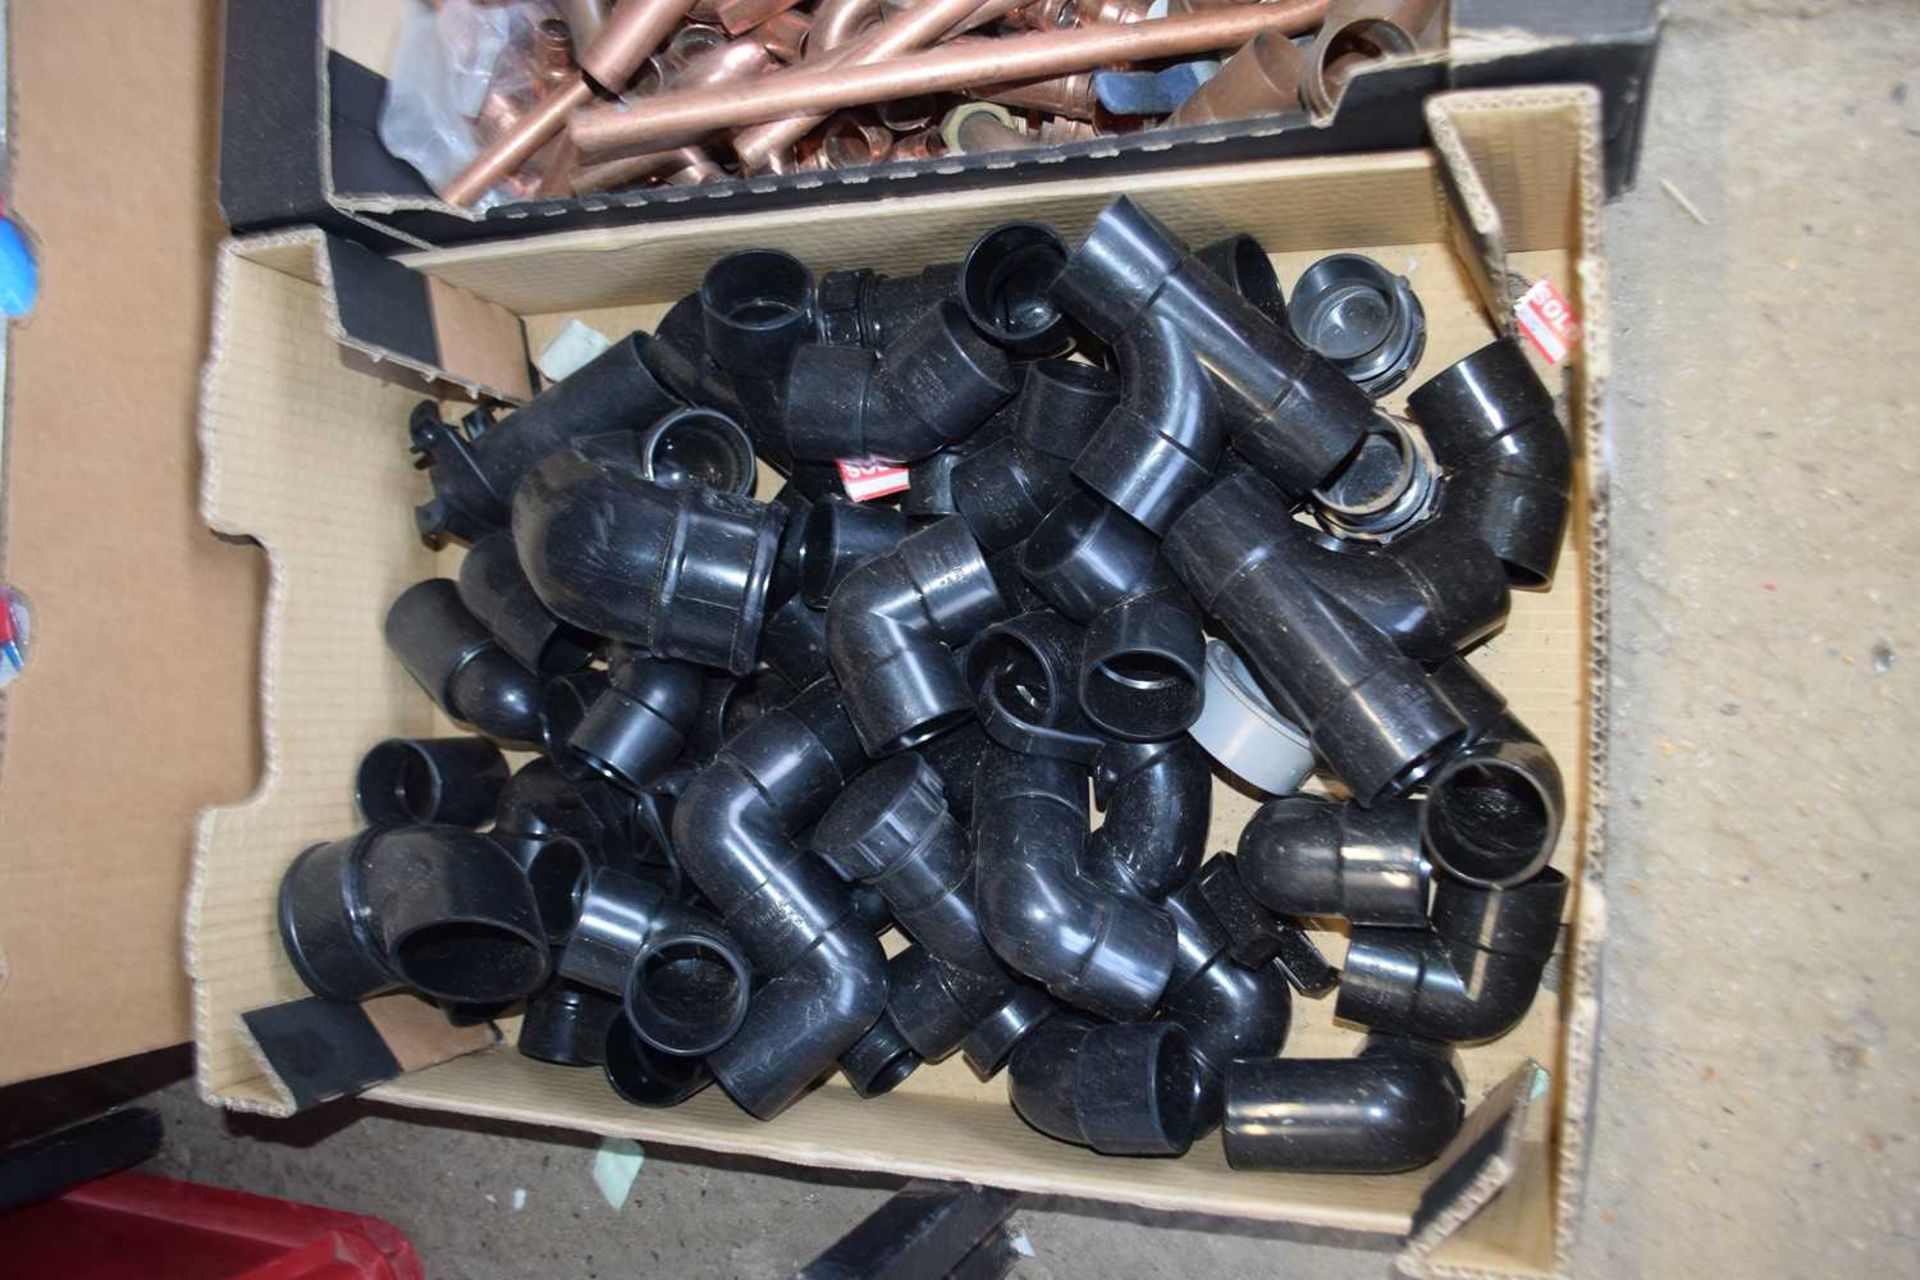 Box containing mixed polypipe connectors